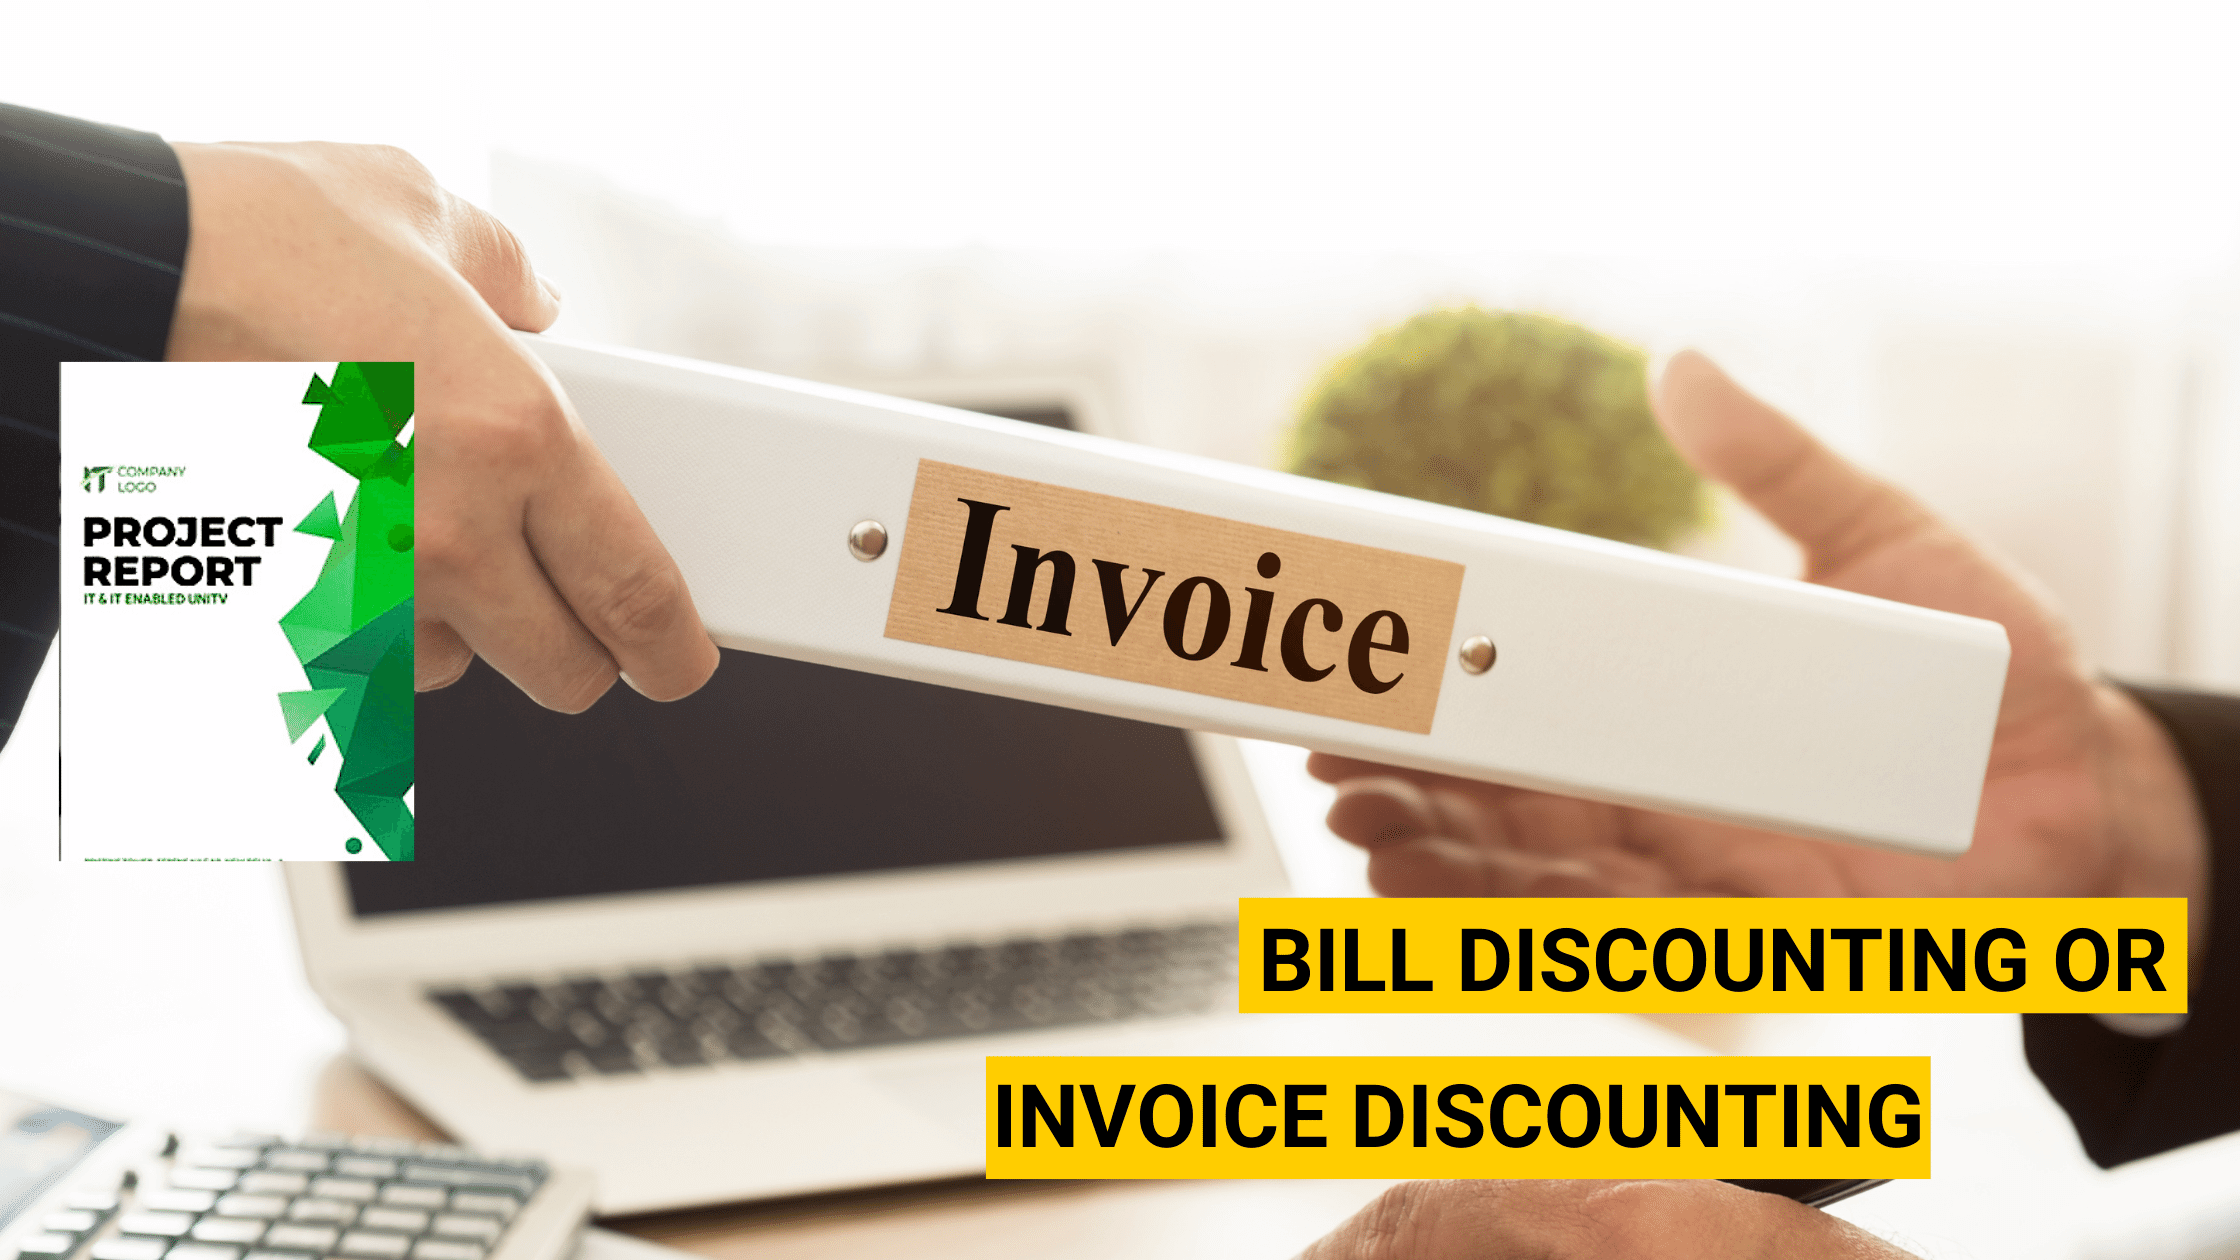 Bill Discounting or Invoice Discounting